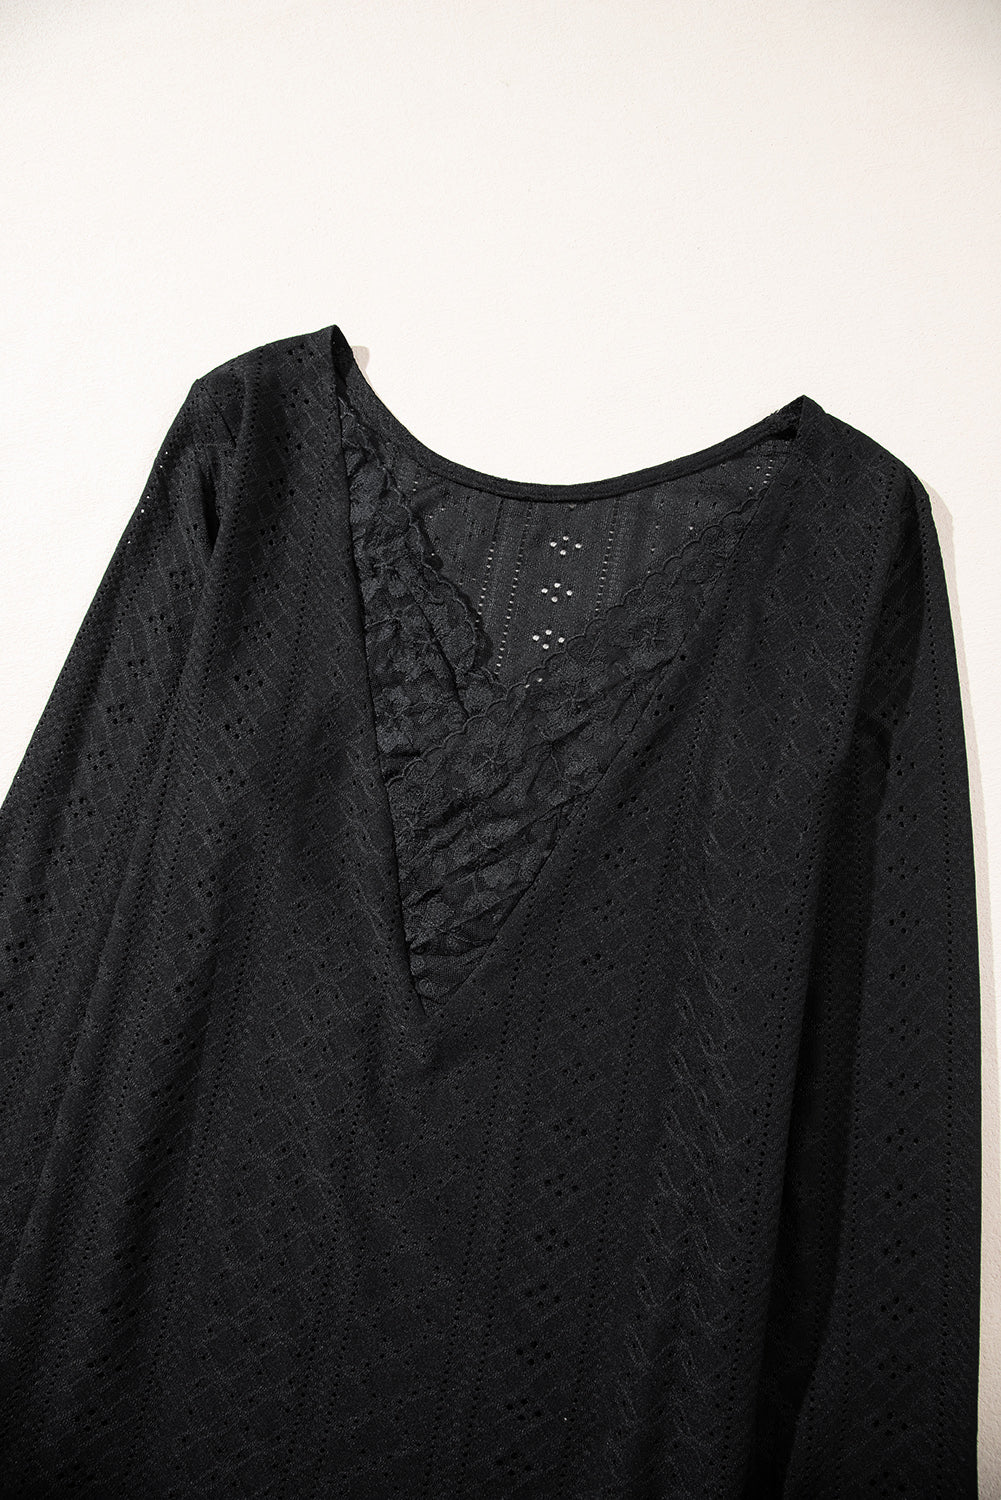 Black Floral Lace Splicing Eyelet Long Sleeve Top